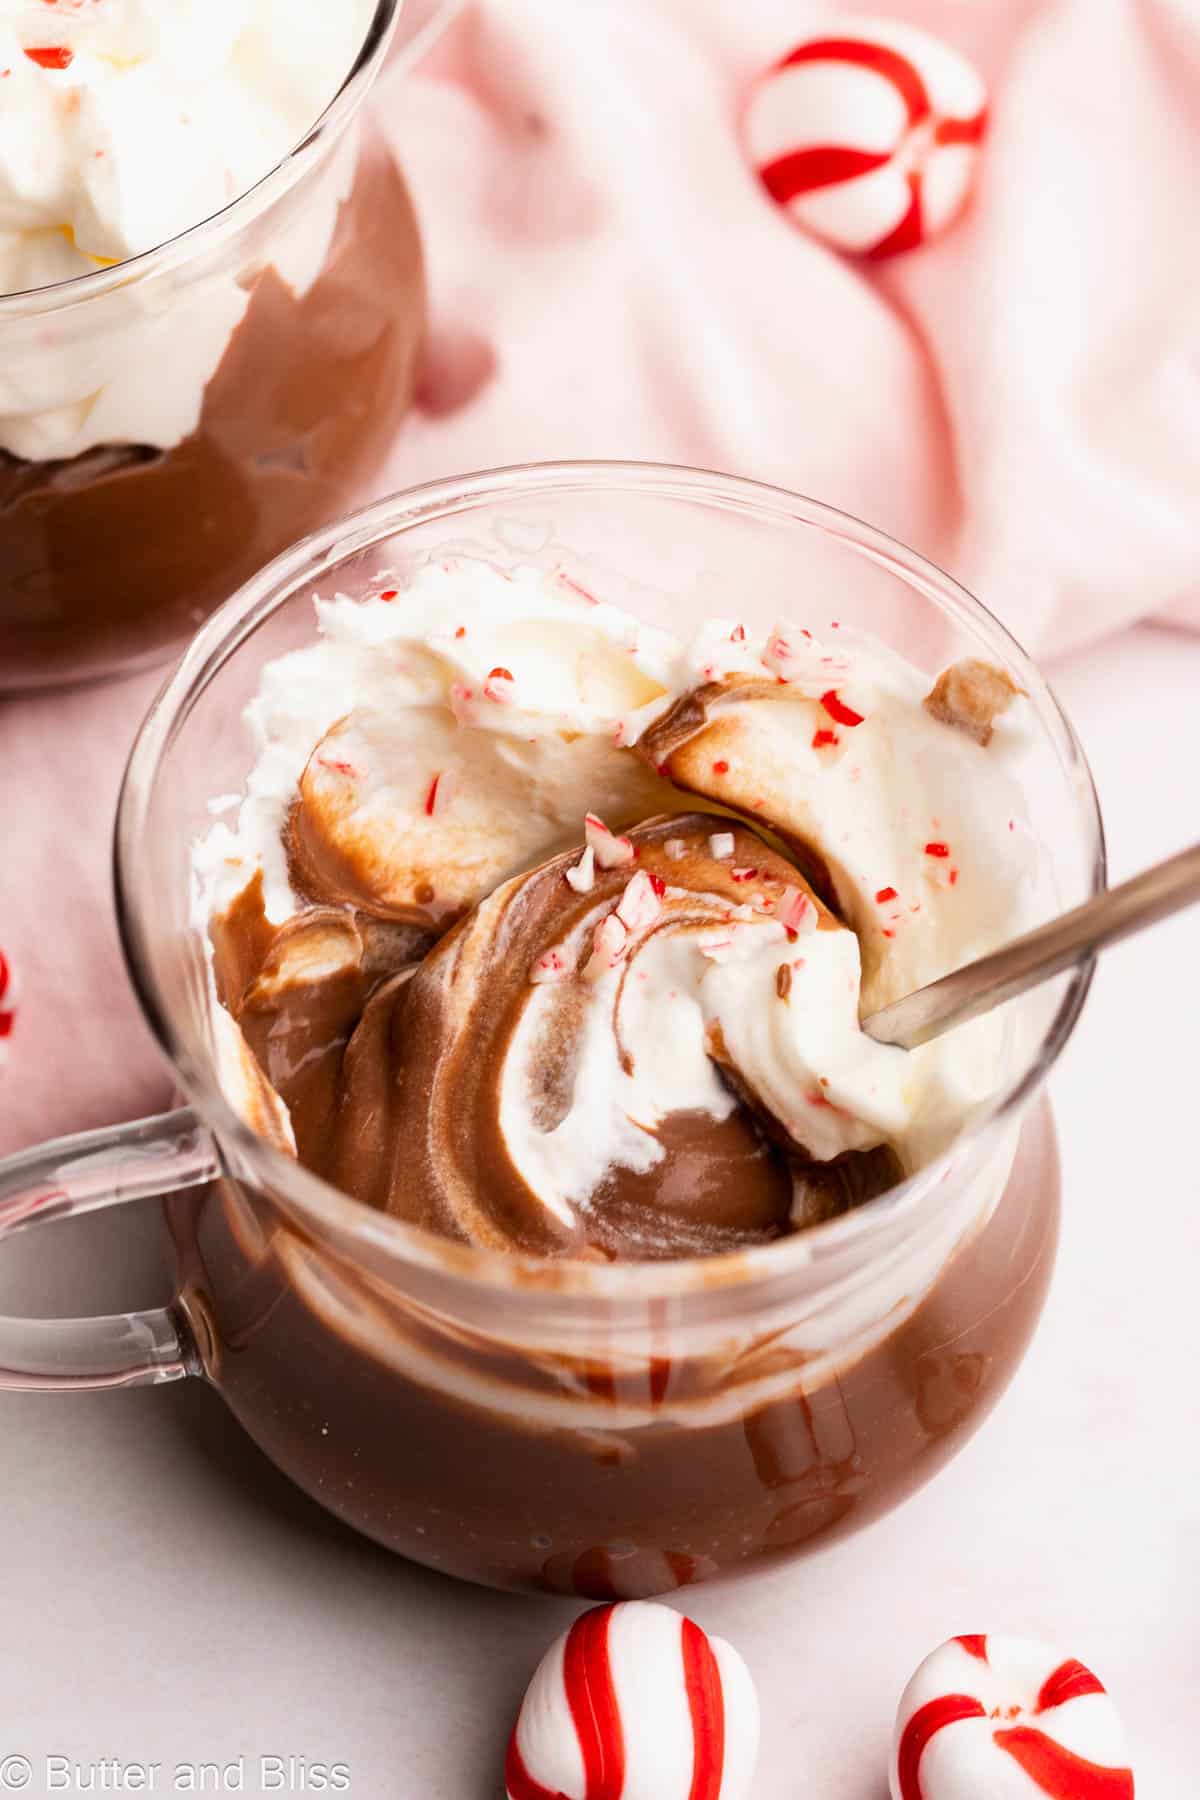 Super creamy holiday pudding in a glass mug surrounded by candy canes candies.